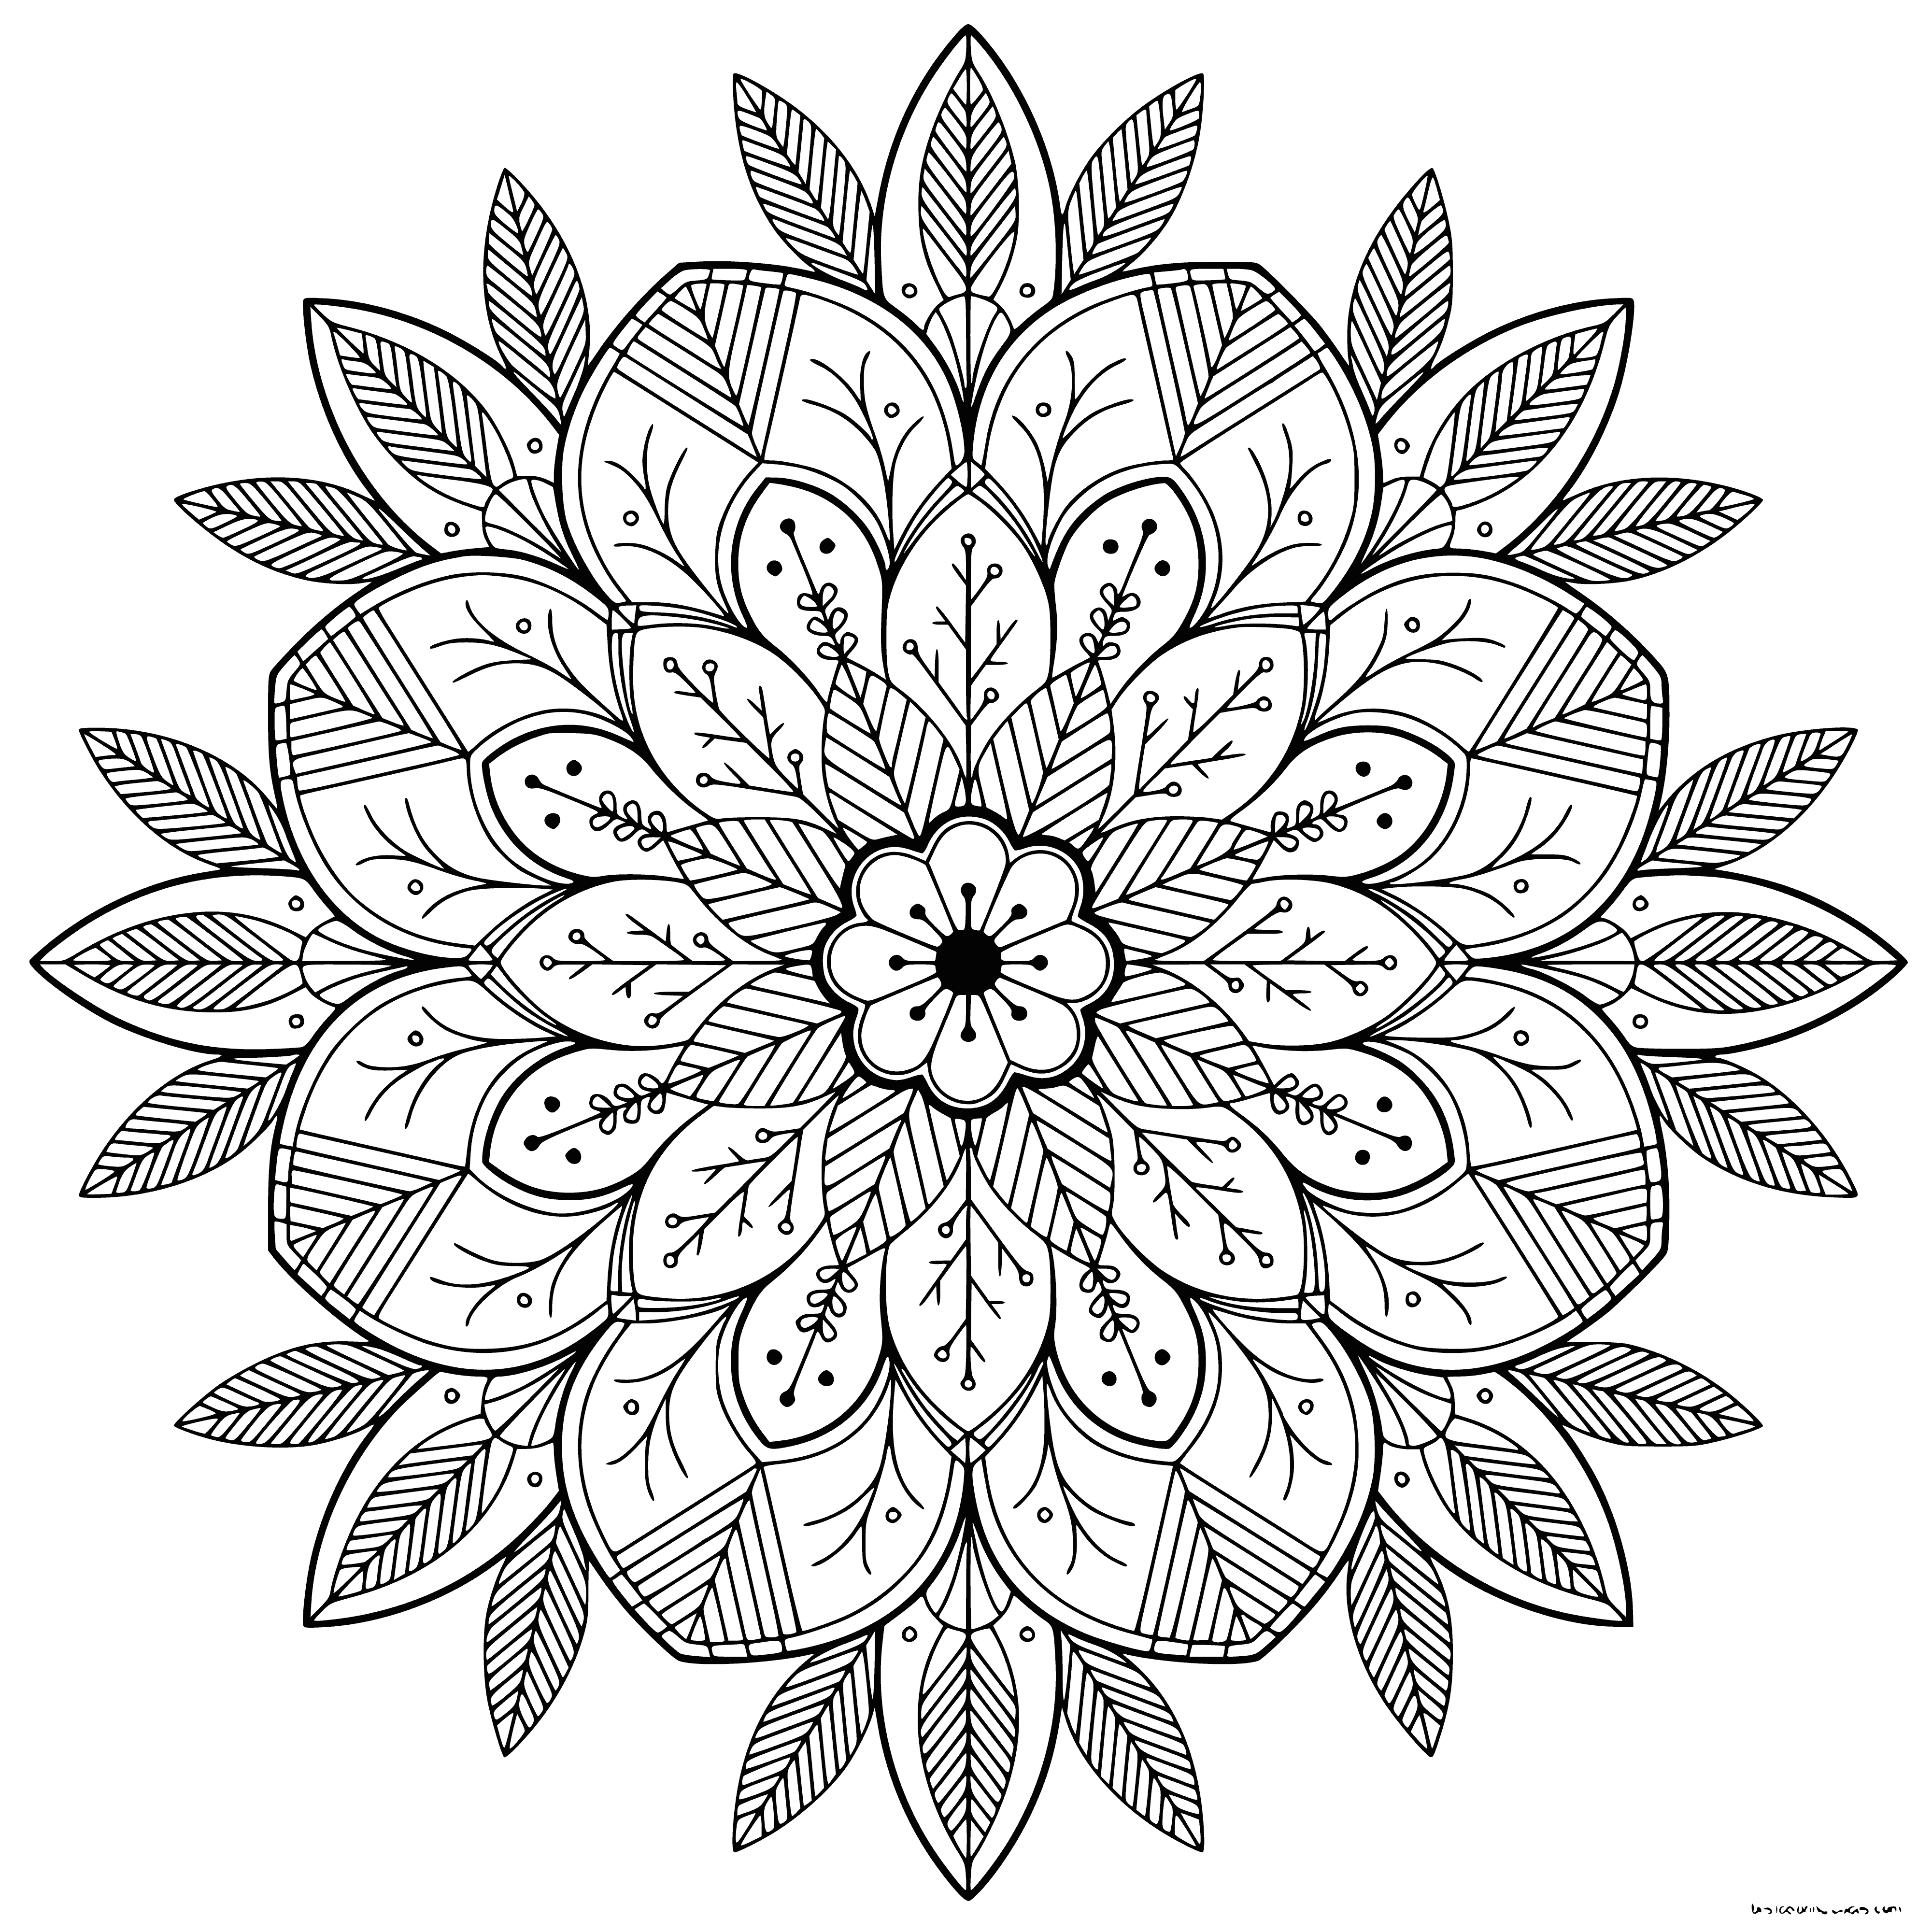 coloring page: Large flower mandala in center of page; majority yellow, orange, pink, purple, surrounded by green border.